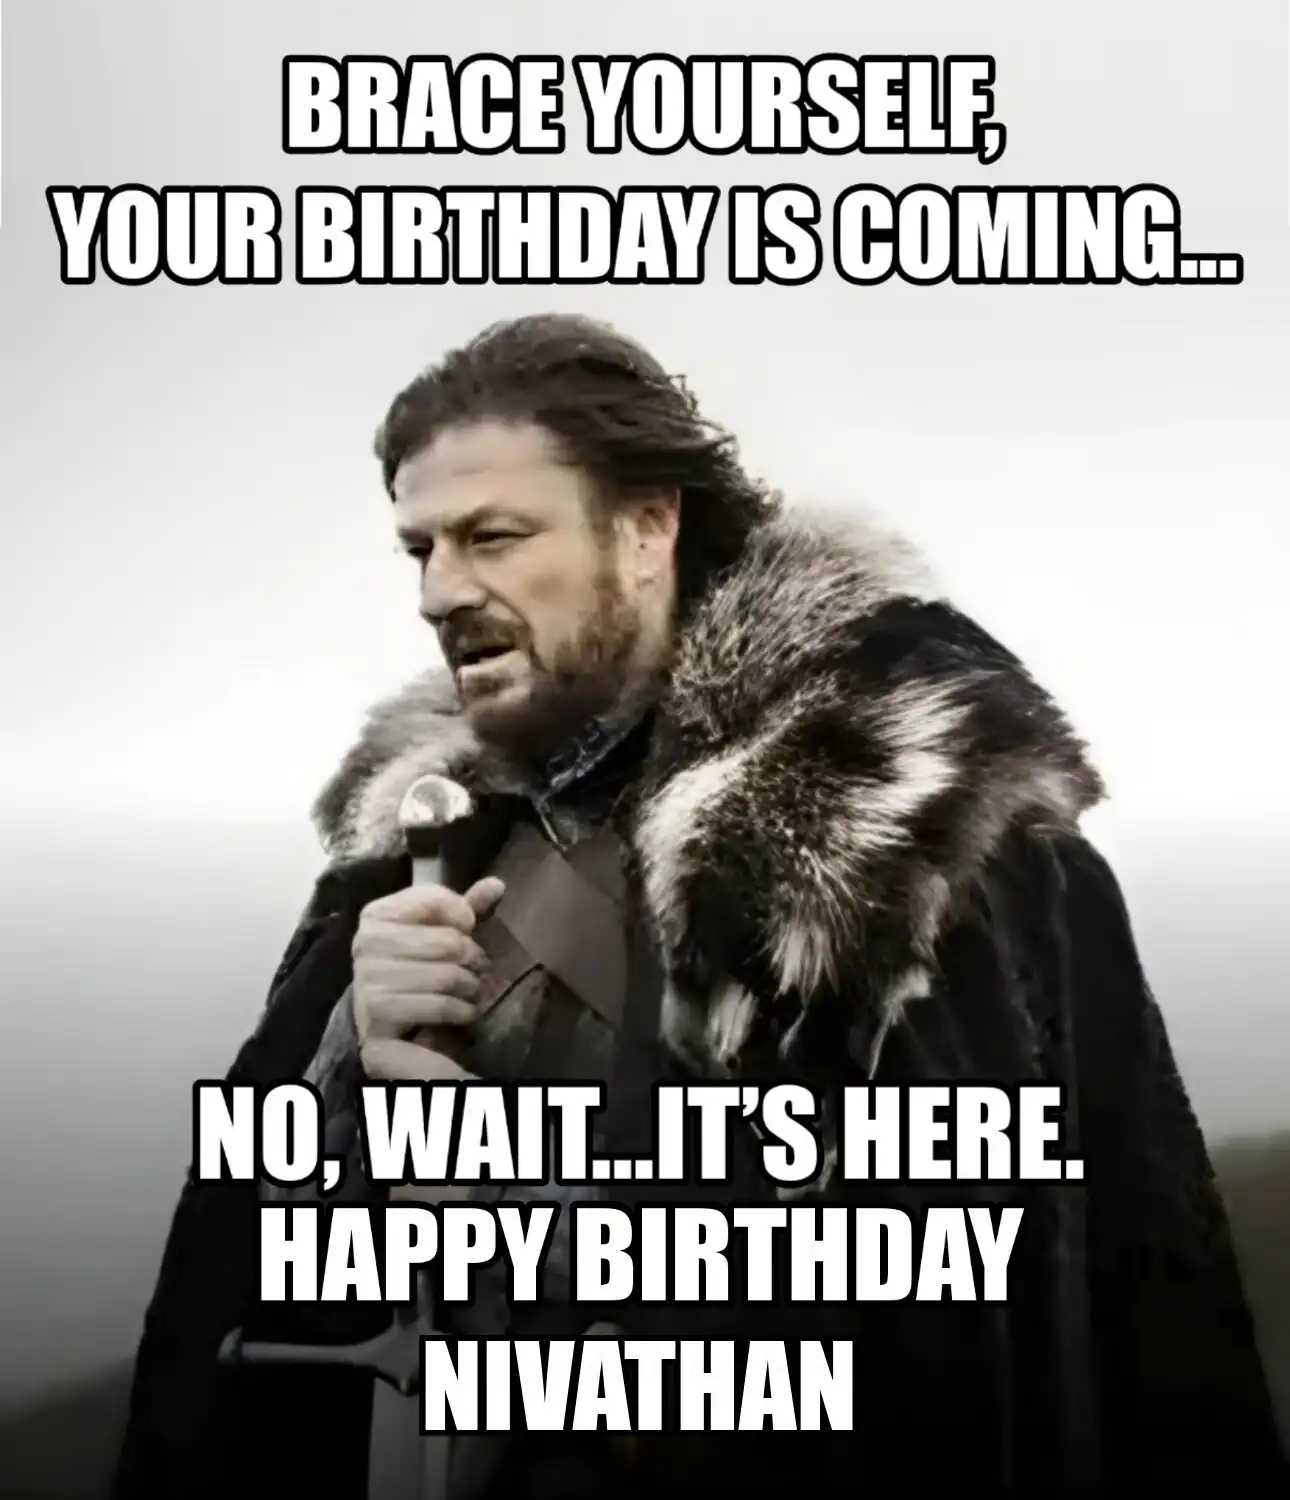 Happy Birthday Nivathan Brace Yourself Your Birthday Is Coming Meme